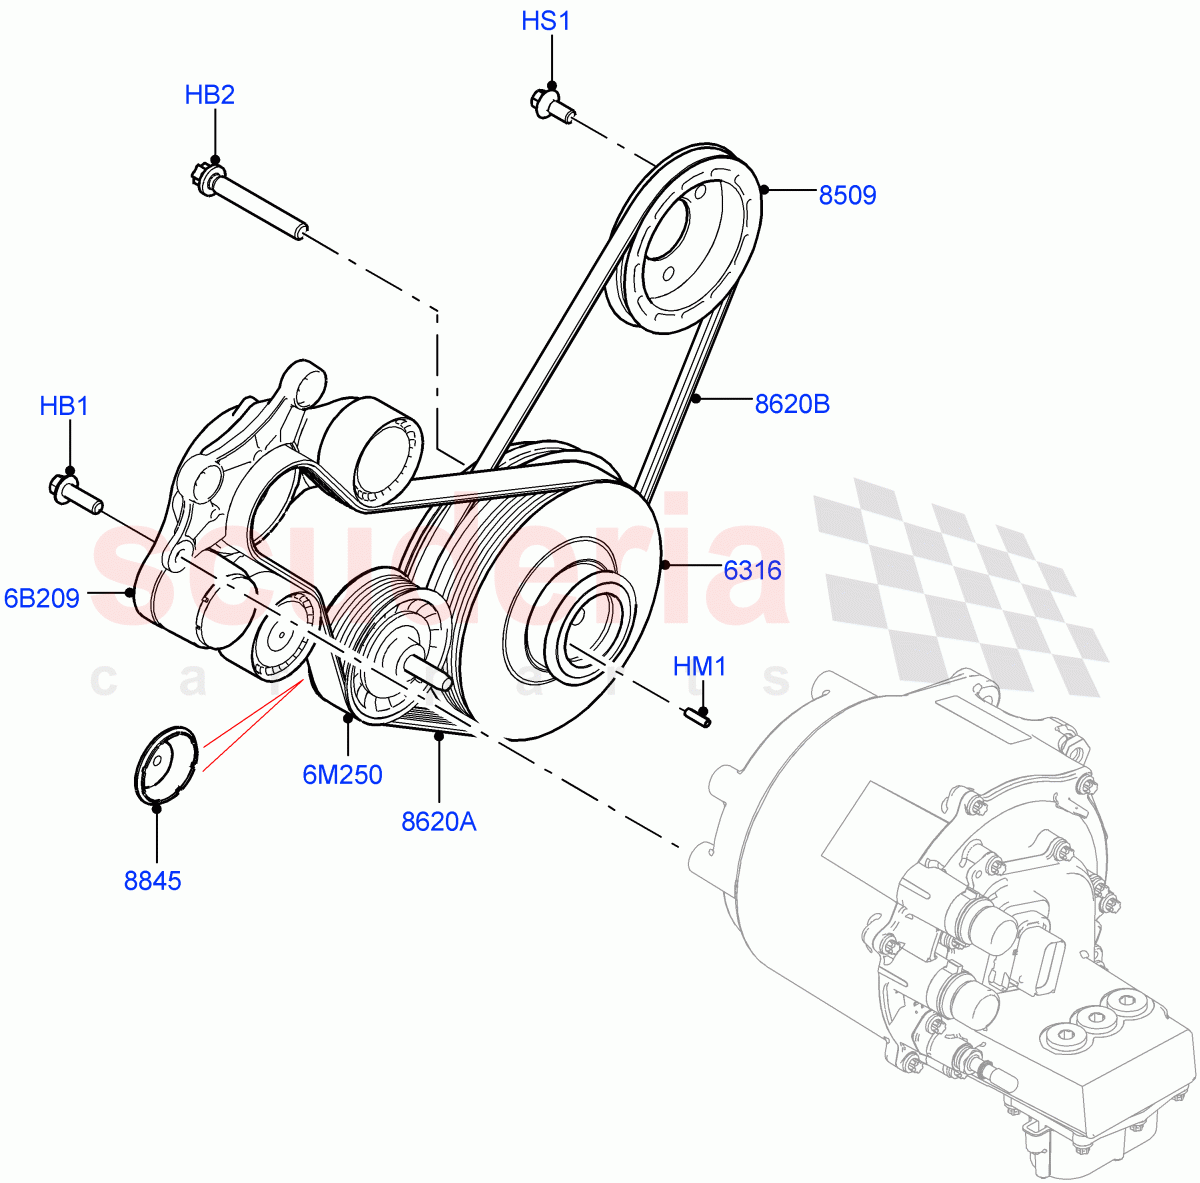 Pulleys And Drive Belts(1.5L AJ20P3 Petrol High PHEV,Changsu (China))((V)FROMKG446857) of Land Rover Land Rover Discovery Sport (2015+) [1.5 I3 Turbo Petrol AJ20P3]